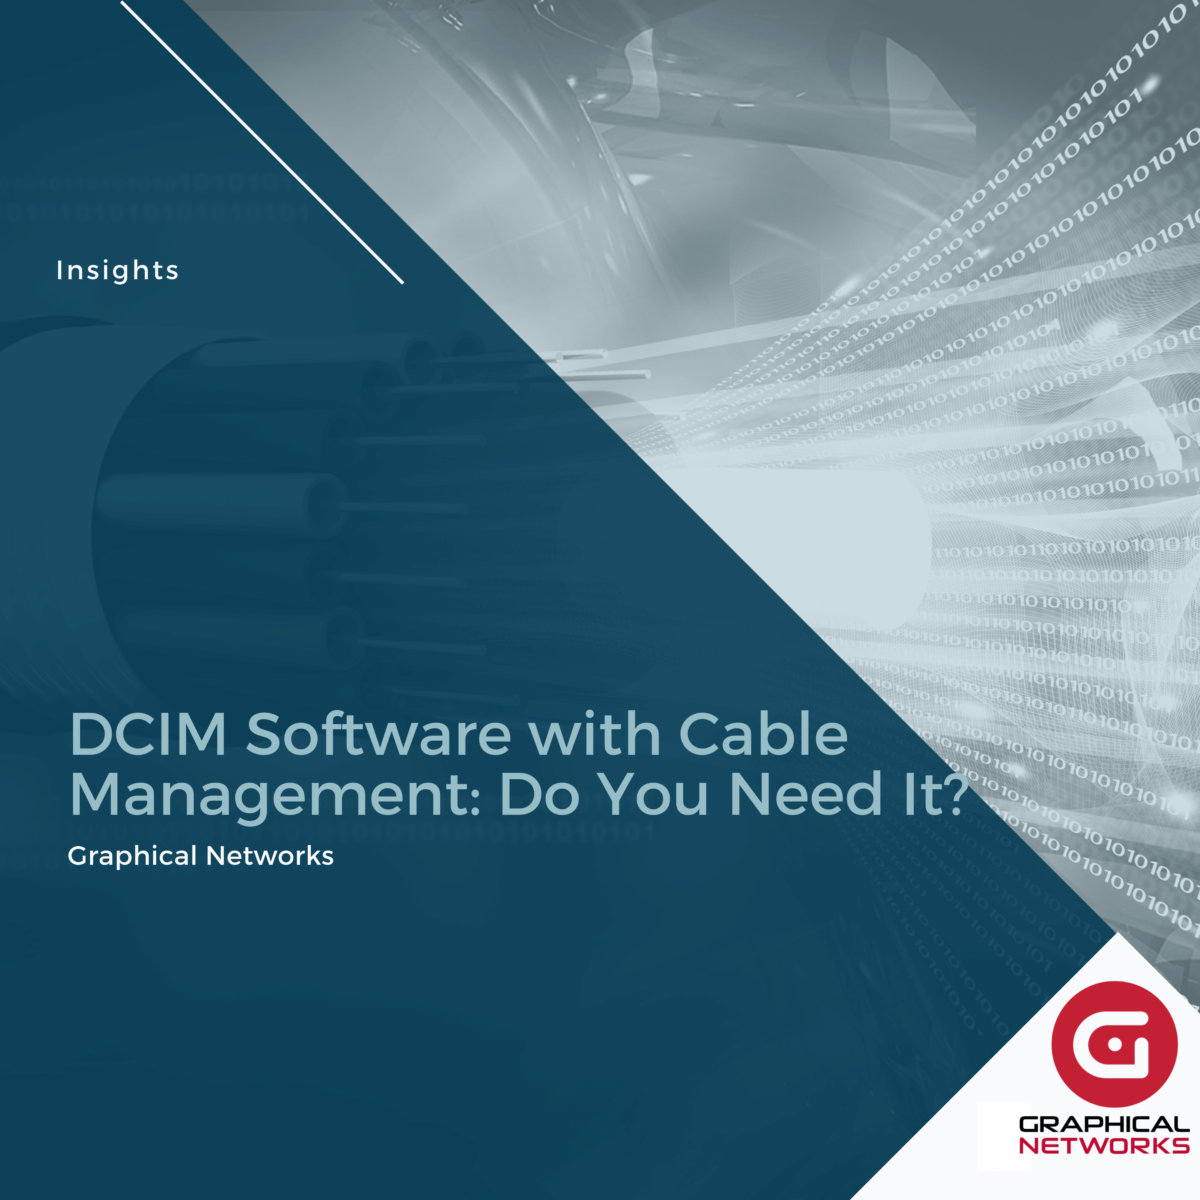 DCIM Software with Cable Management: Do You Need It?